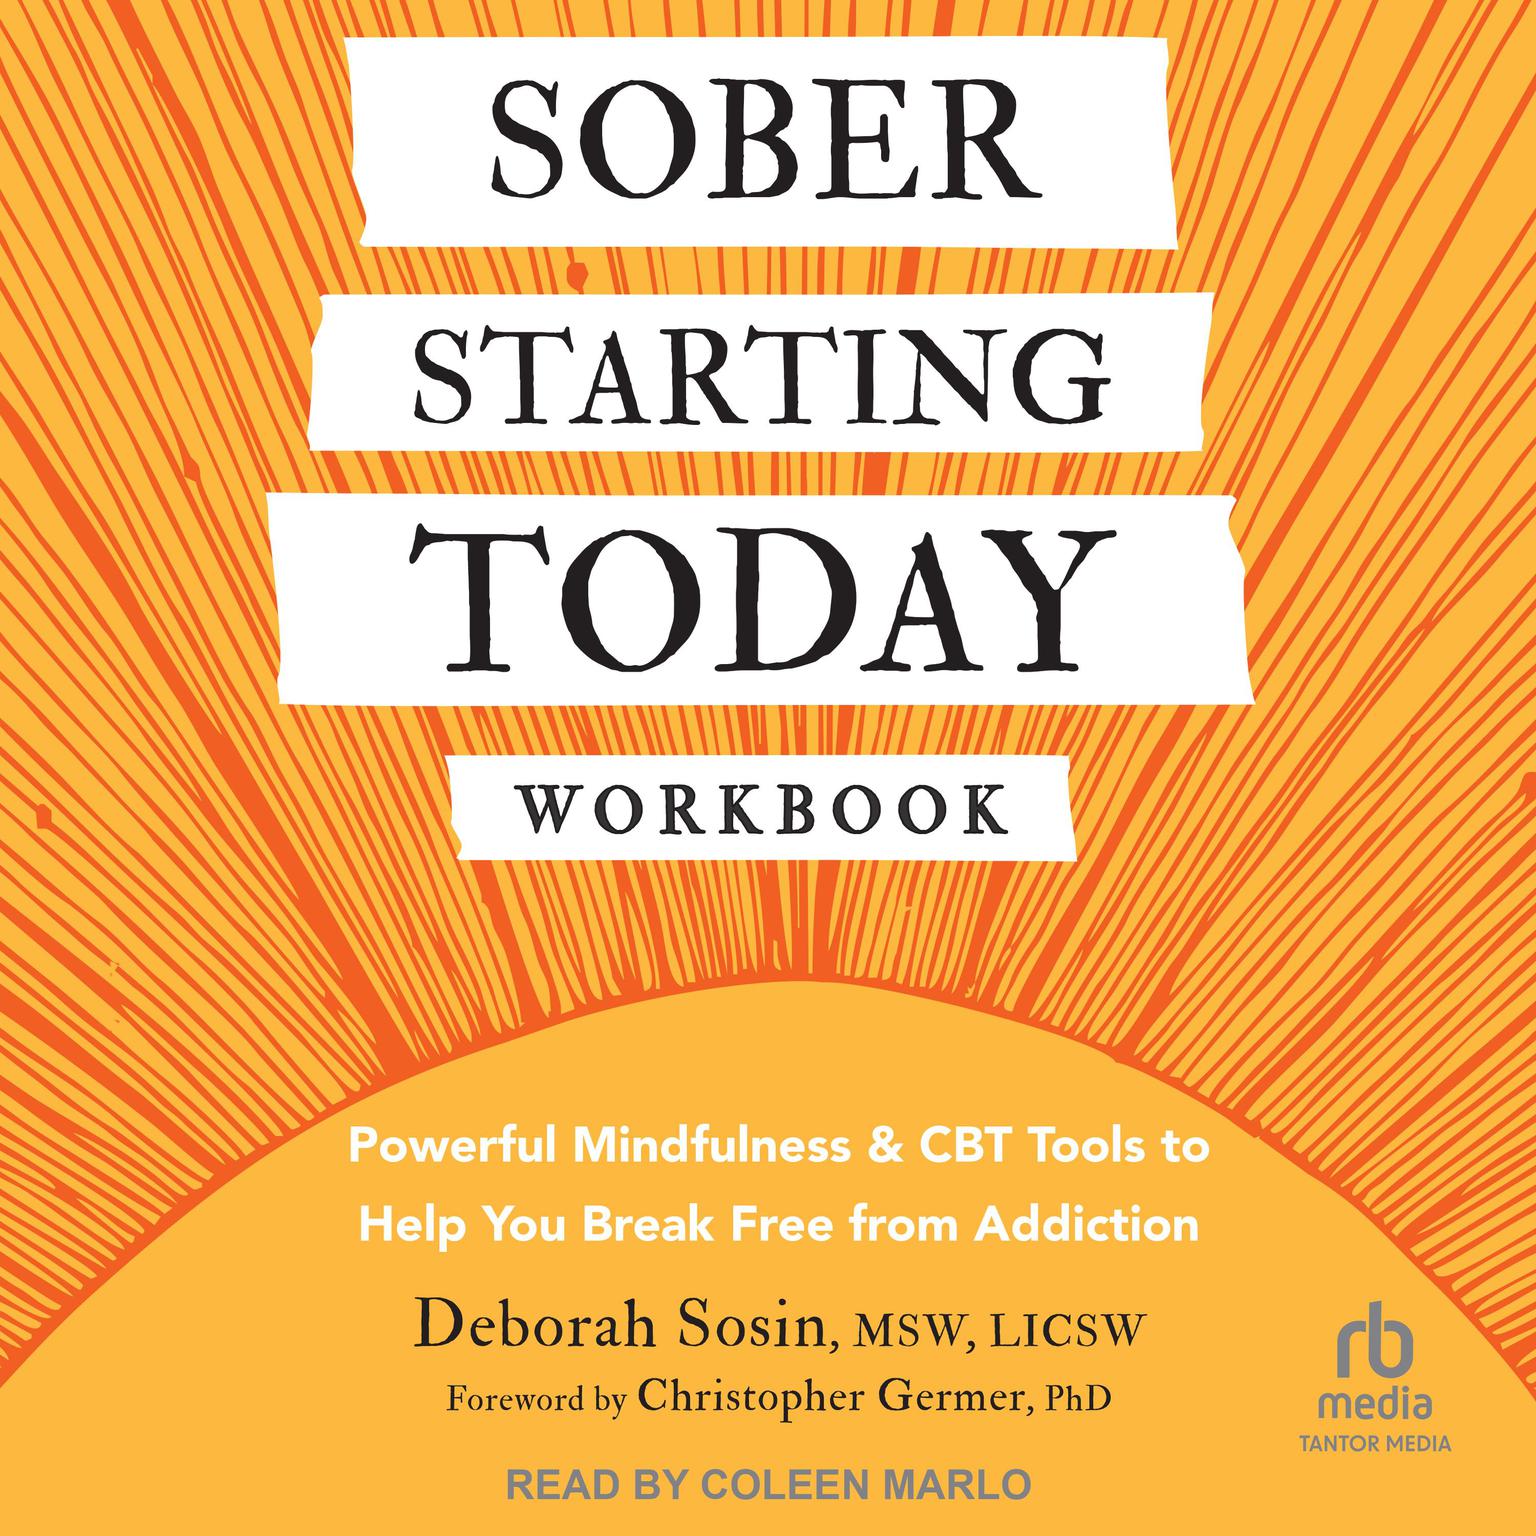 Sober Starting Today Workbook: Powerful Mindfulness and CBT Tools to Help You Break Free from Addiction Audiobook, by Deborah Sosin, MSW, LICSW